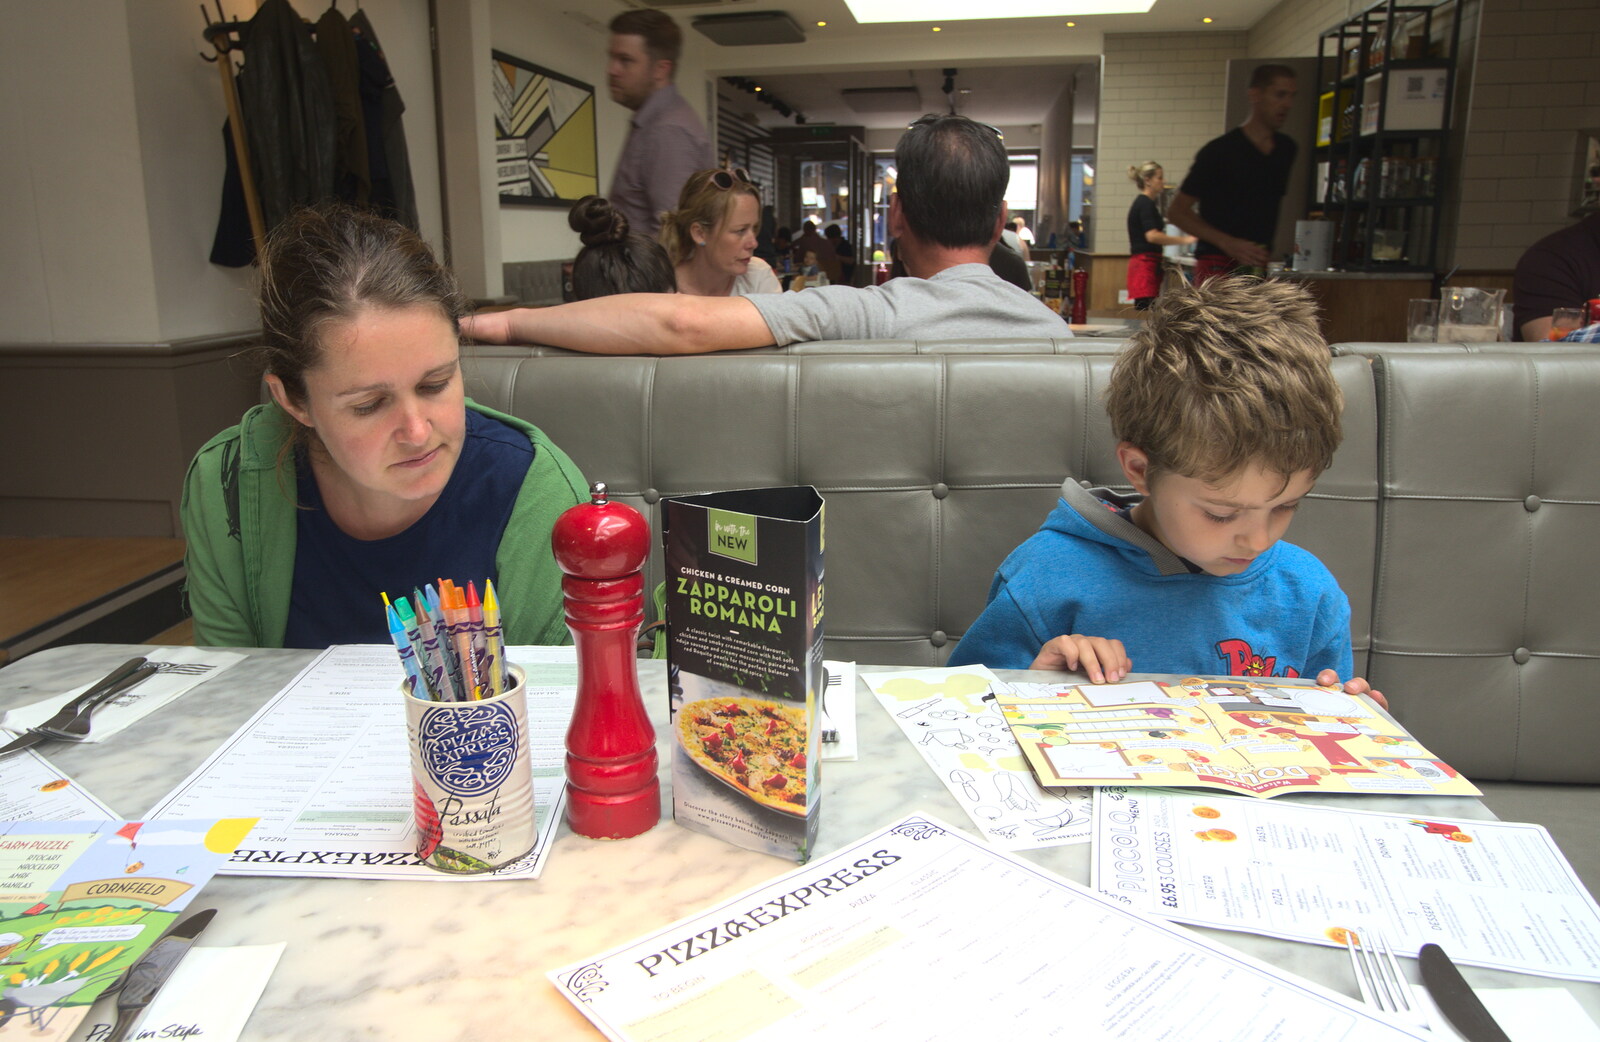 Isobel and Fred scope the menu in Pizza Express from Wavy and Martina's Combined Birthdays, Thrandeston, Suffolk - 27th May 2017